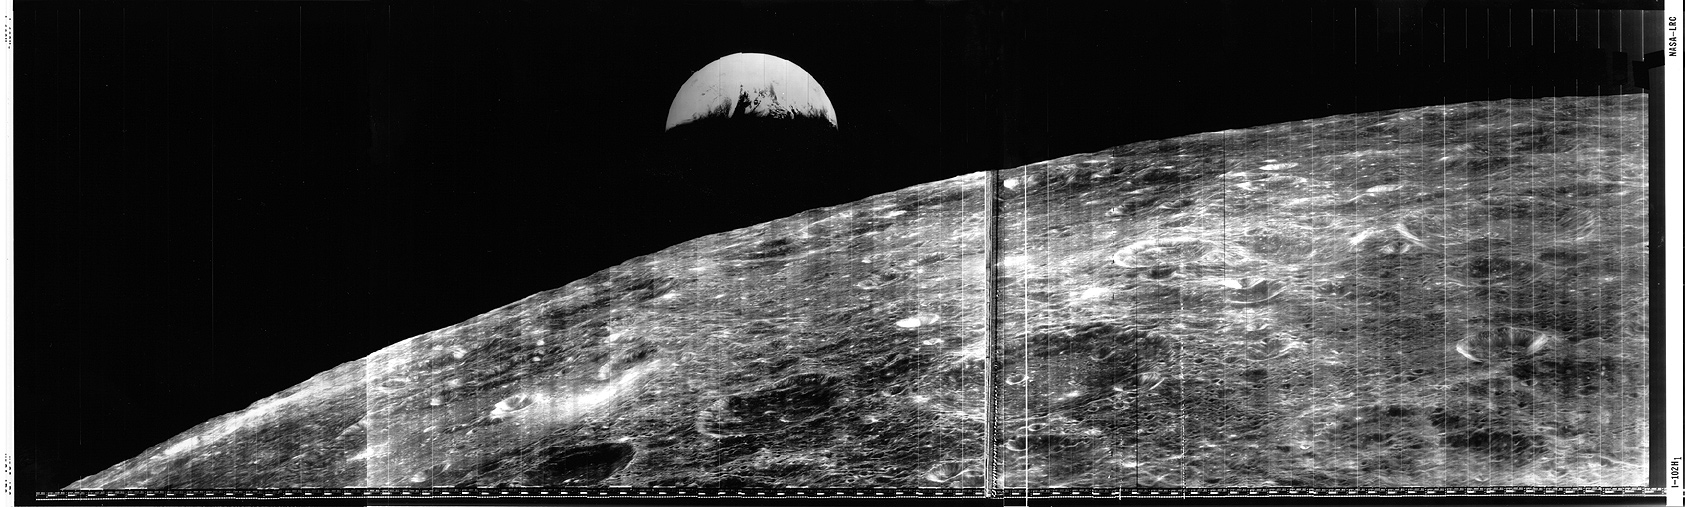 View of Earth from the moon